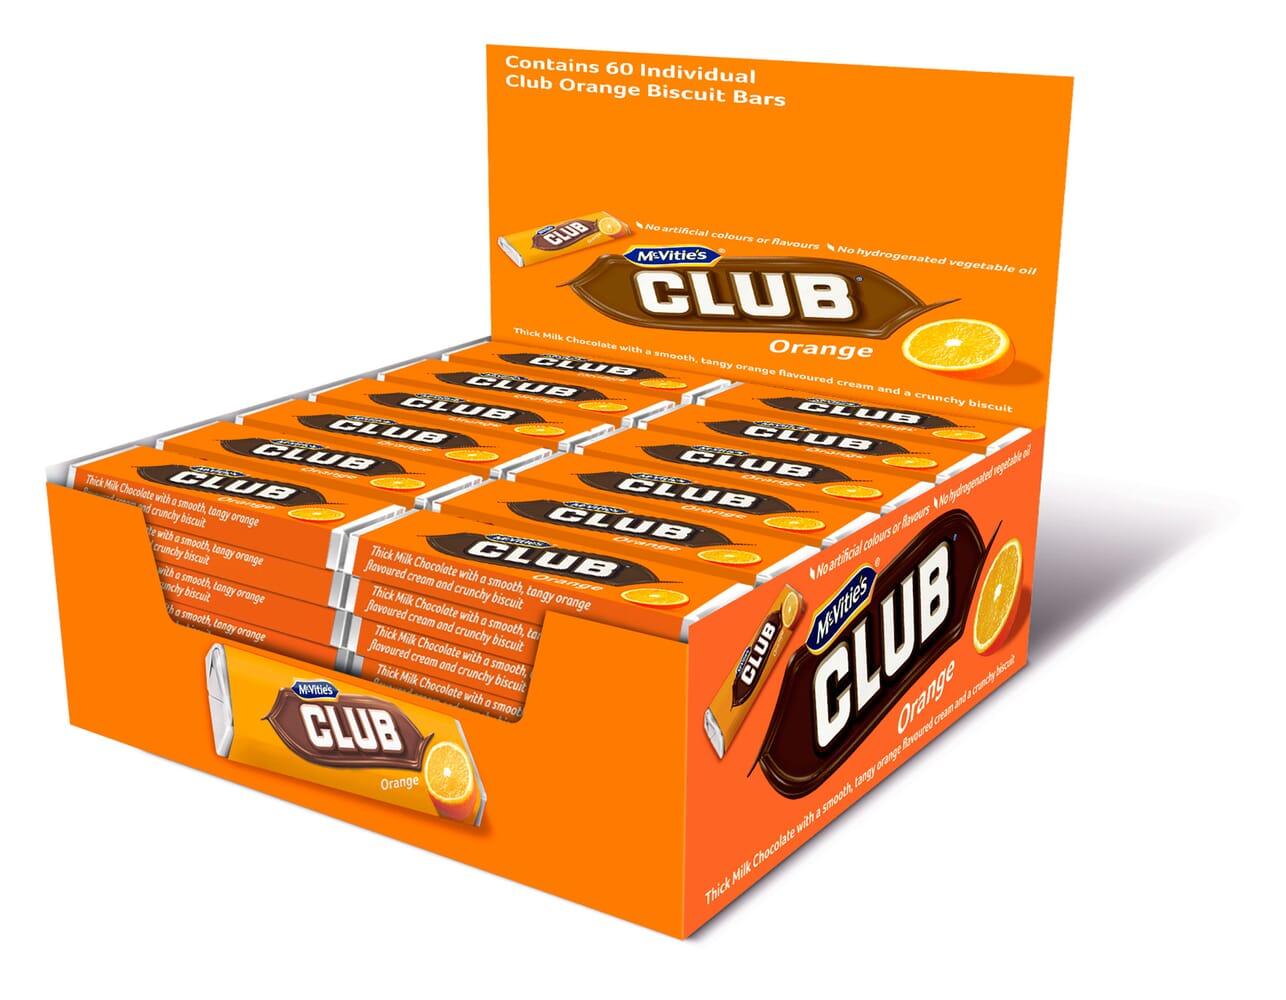 McVitie's Club Orange Biscuit Bars - Box of 60 Individually Wrapped - Vending Superstore